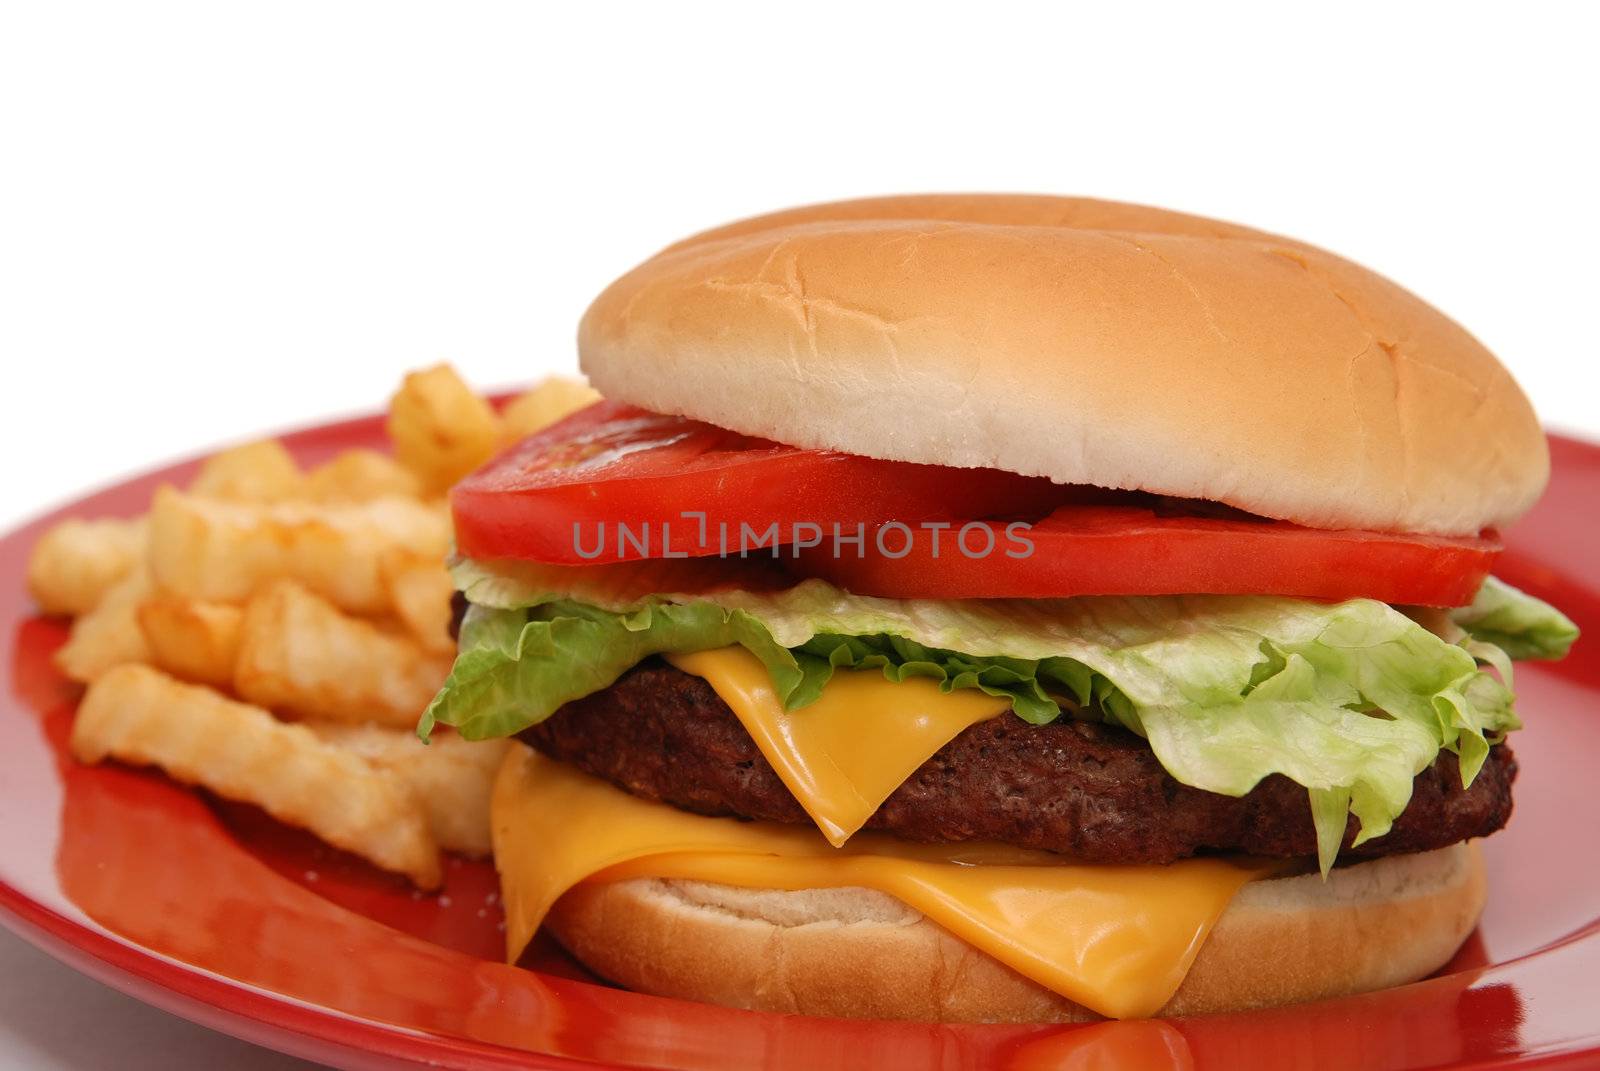 Cheeseburger and french fries on red plate.